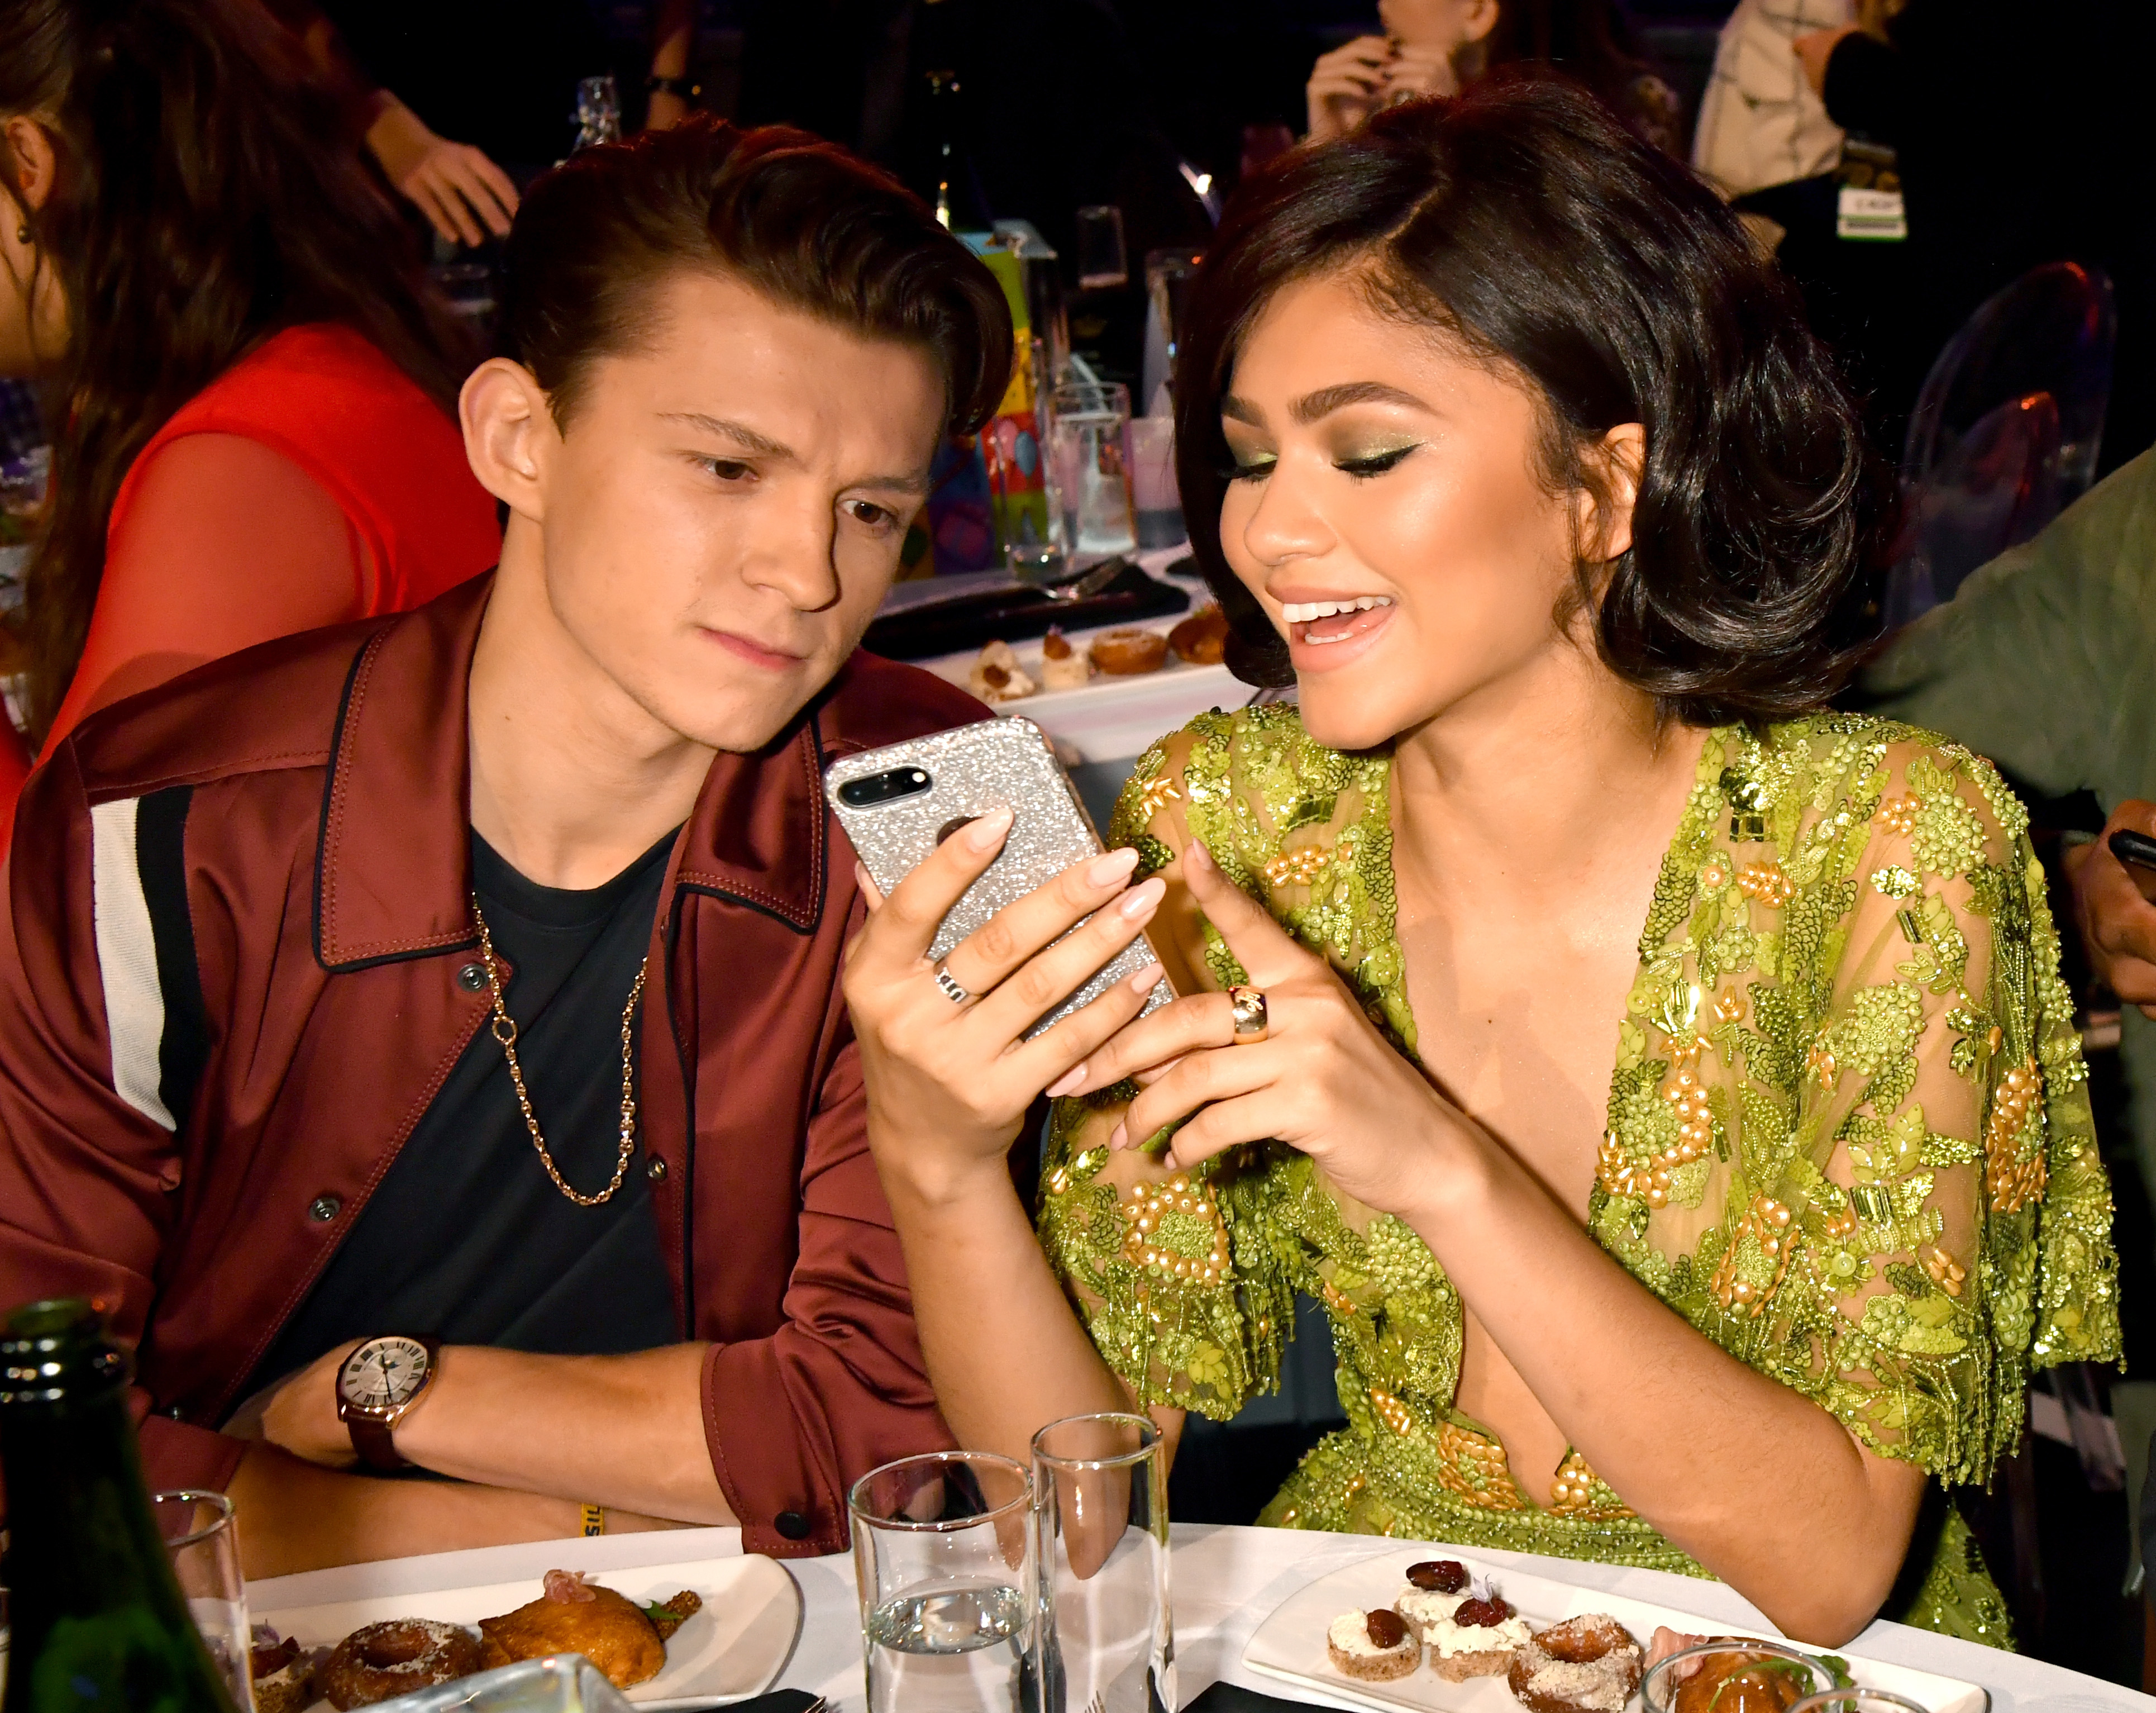 Closeup of Tom Holland and Zendaya looking at a phone sitting at a table of food at an event